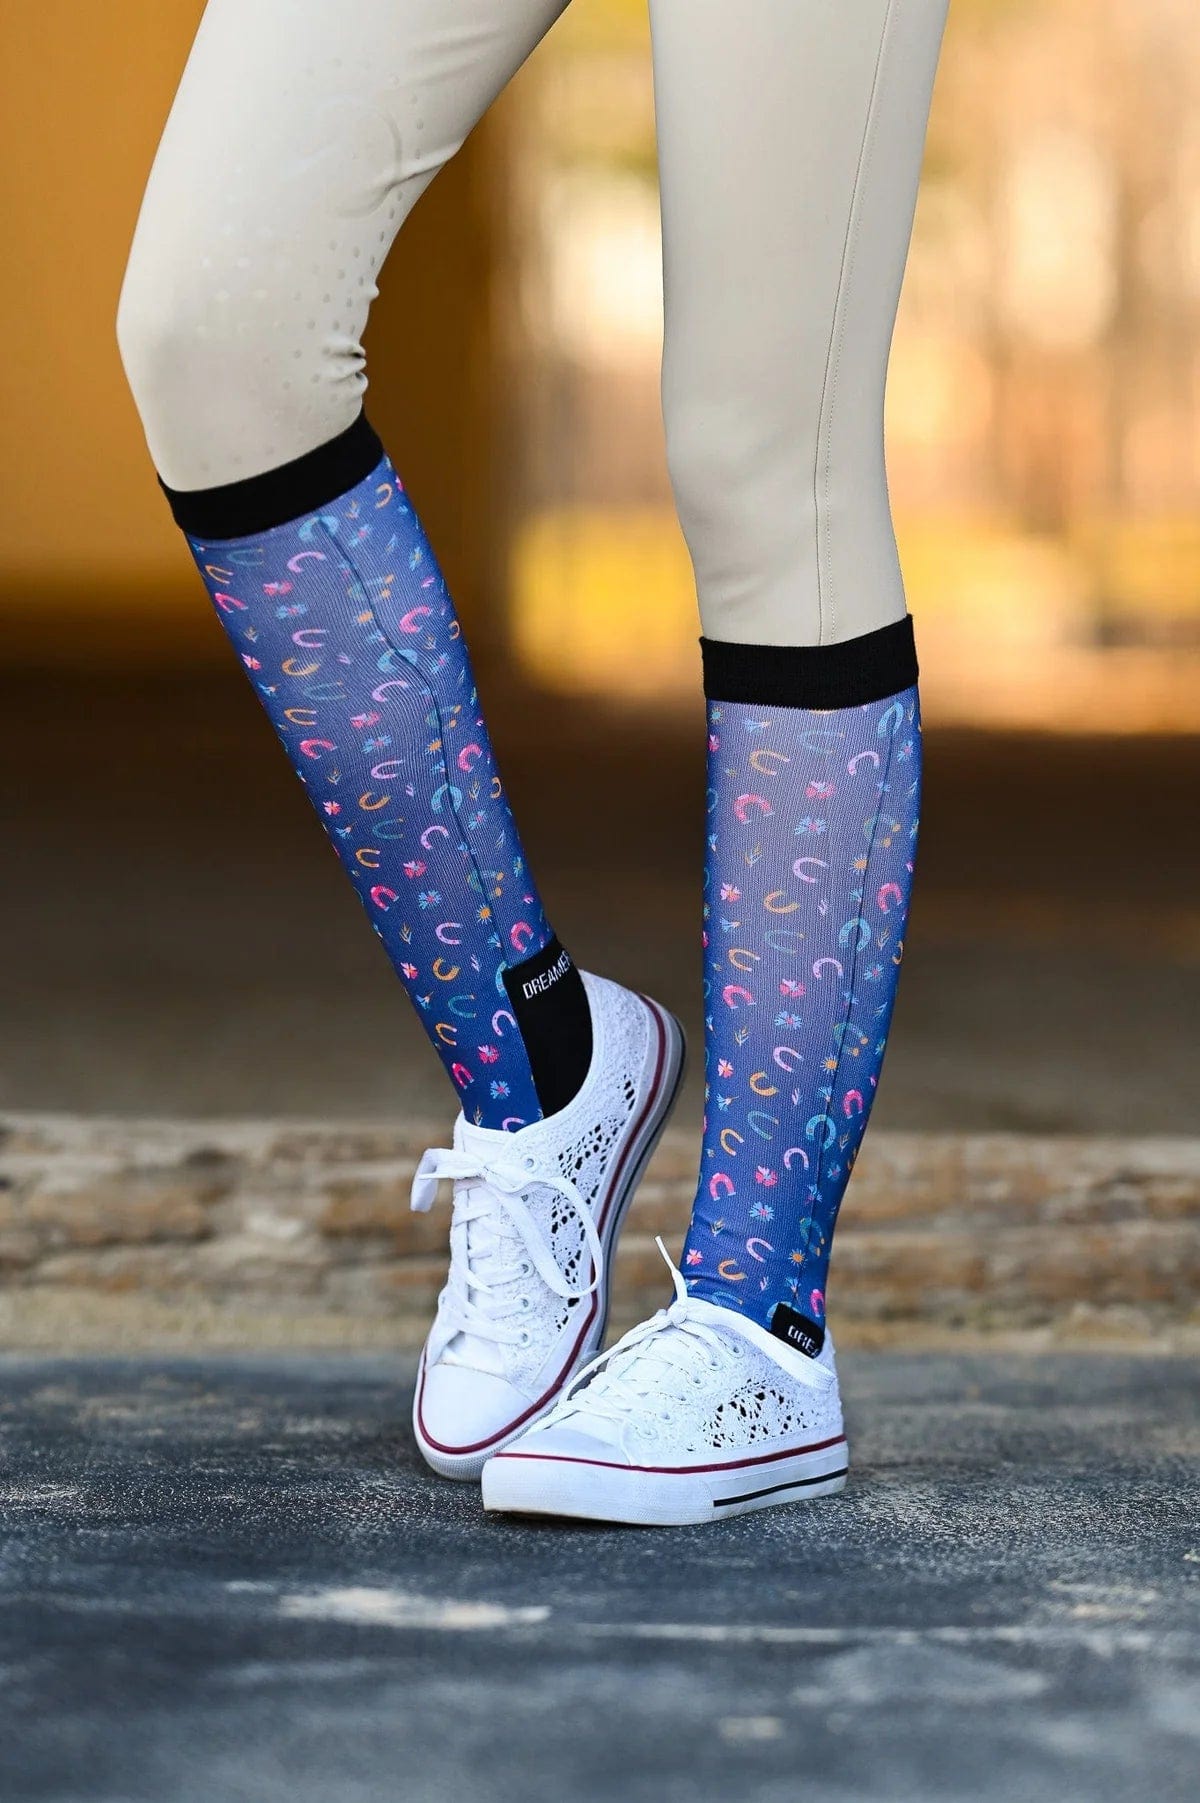 dreamers & schemers Boot Sock Dreamers & Schemers- Sole Mate equestrian team apparel online tack store mobile tack store custom farm apparel custom show stable clothing equestrian lifestyle horse show clothing riding clothes horses equestrian tack store